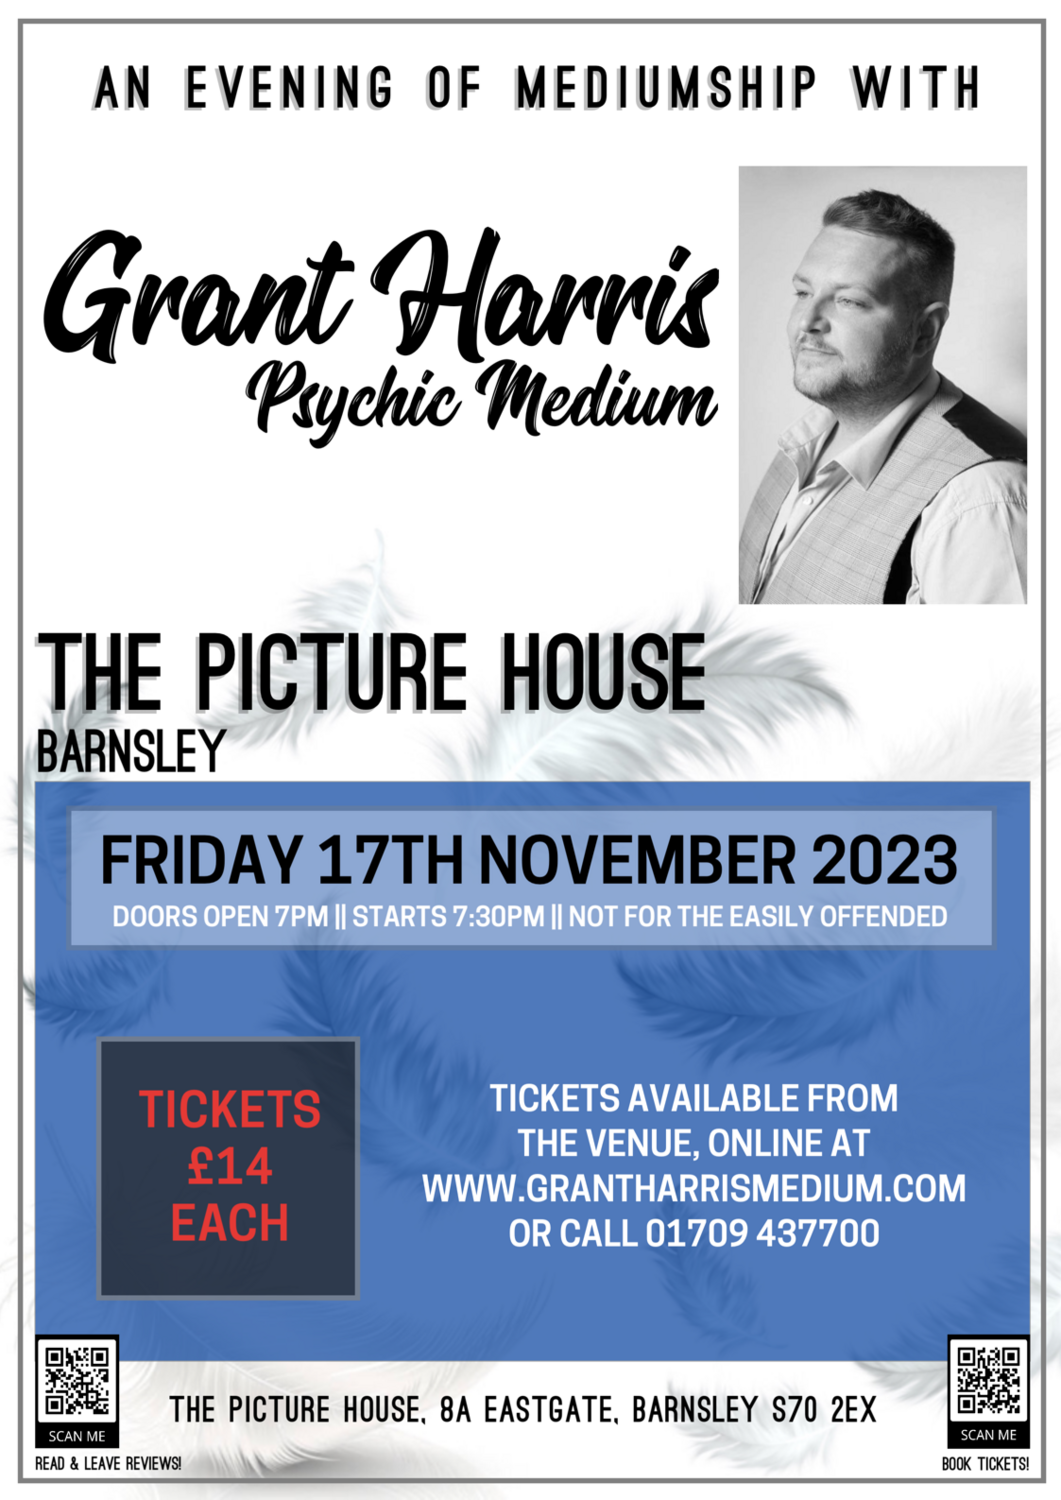 The Picture House, Barnsley, Friday 17th November 2023